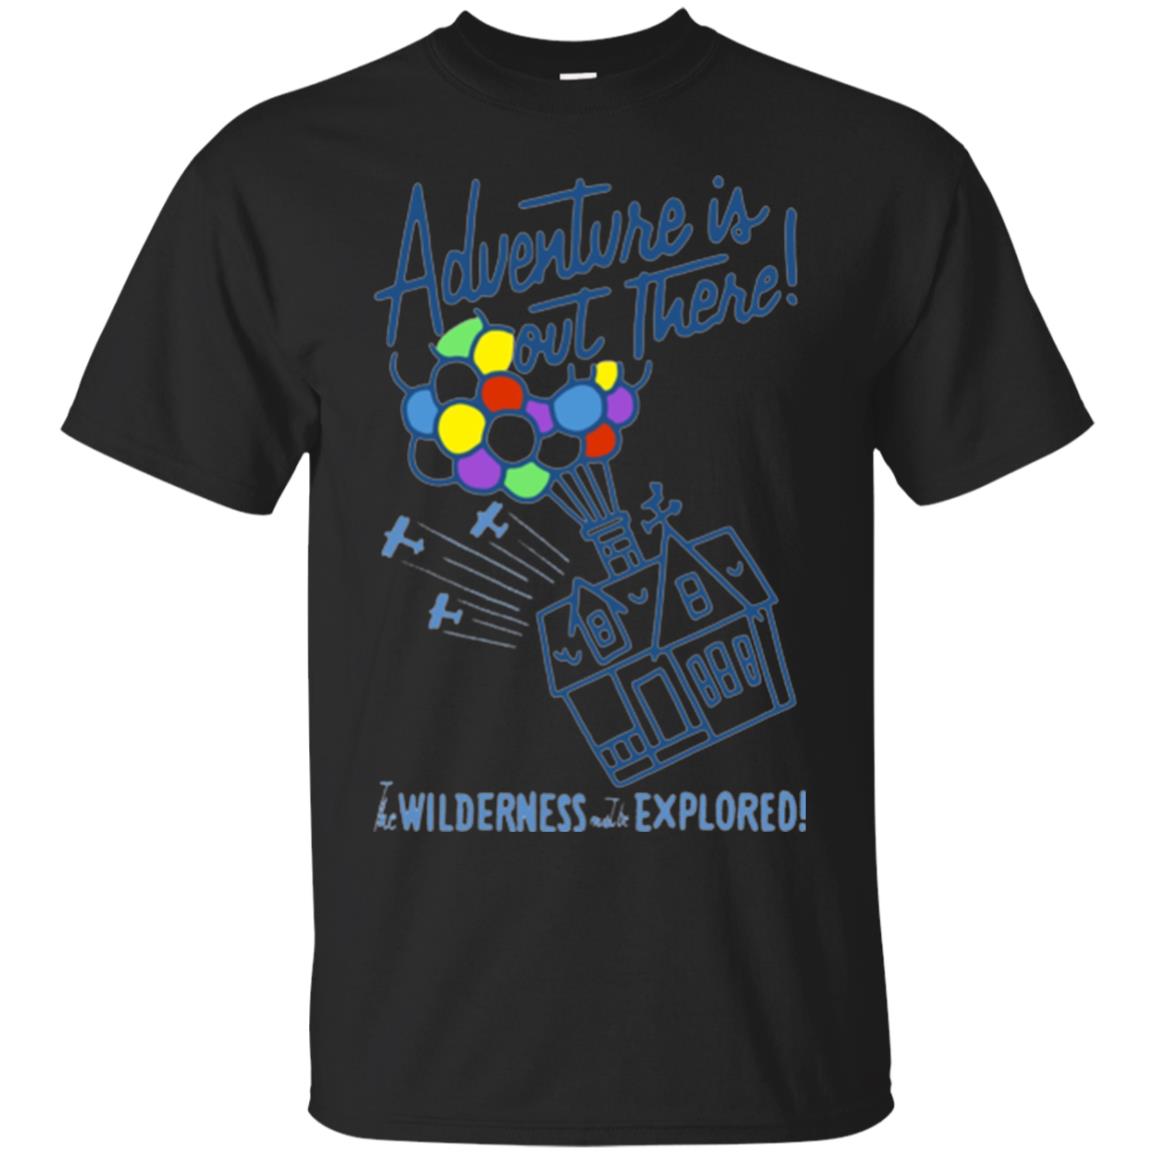 Adventure Is Out There T-shirt